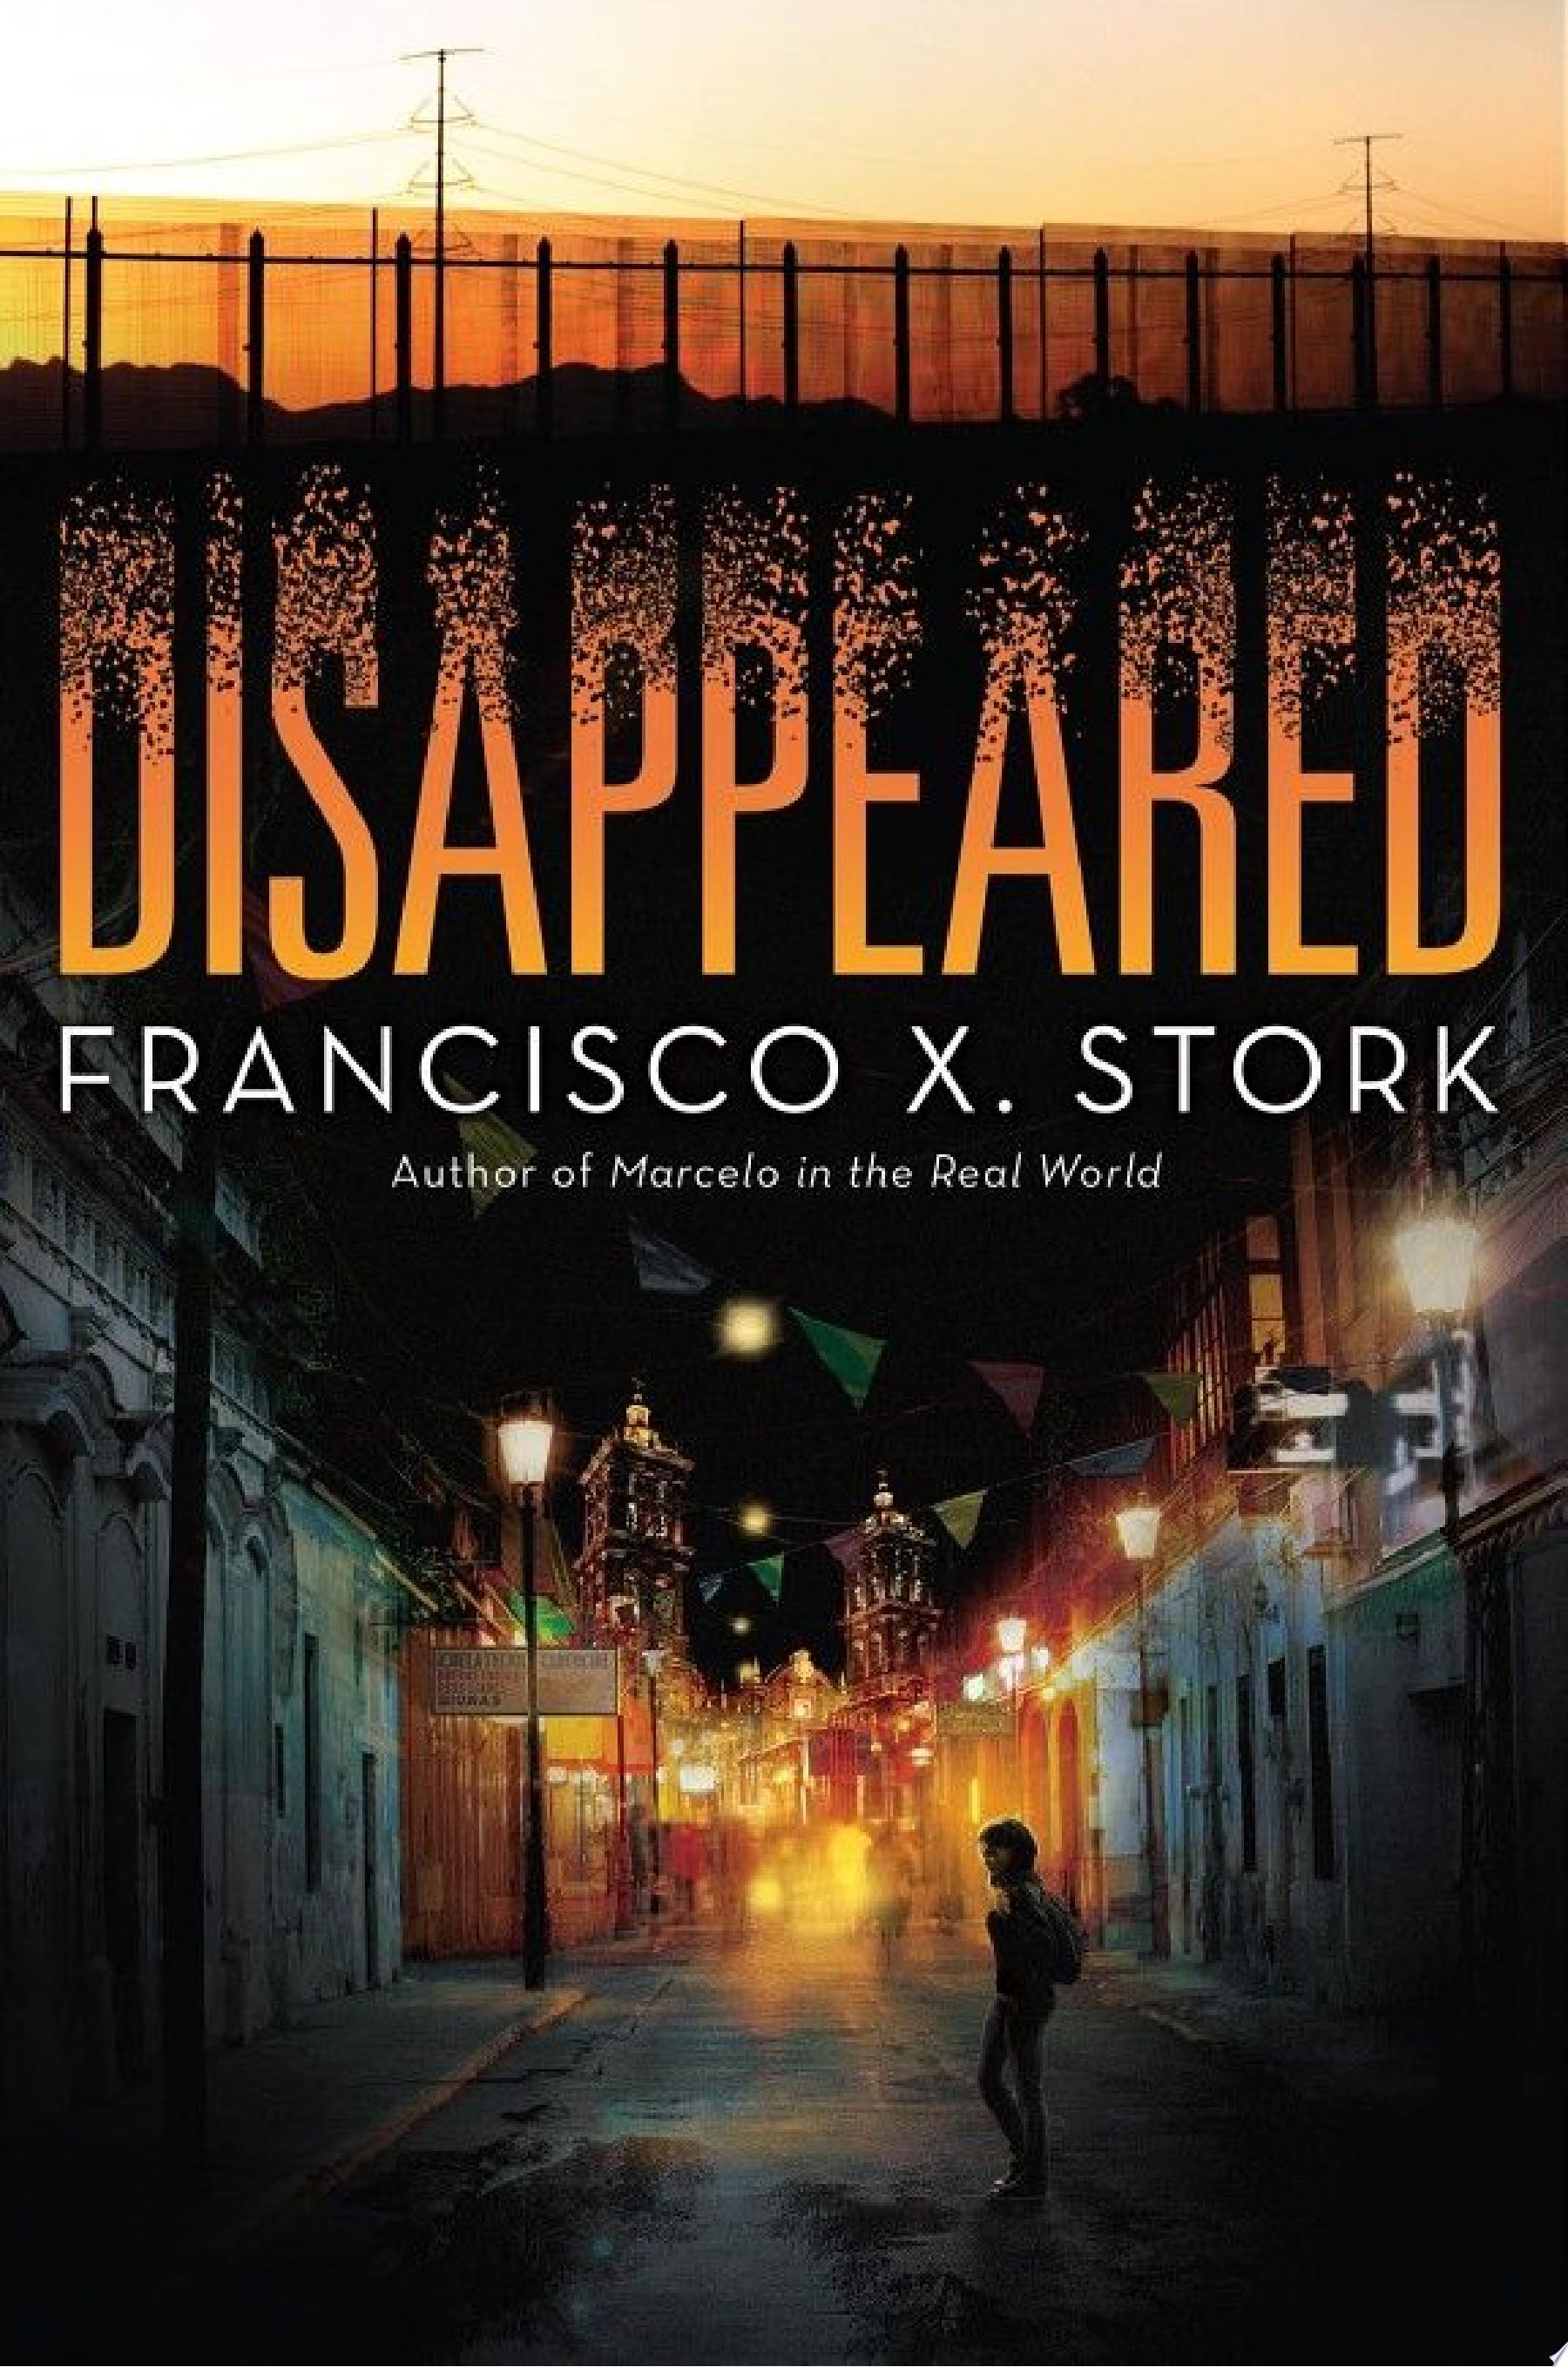 Image for "Disappeared"